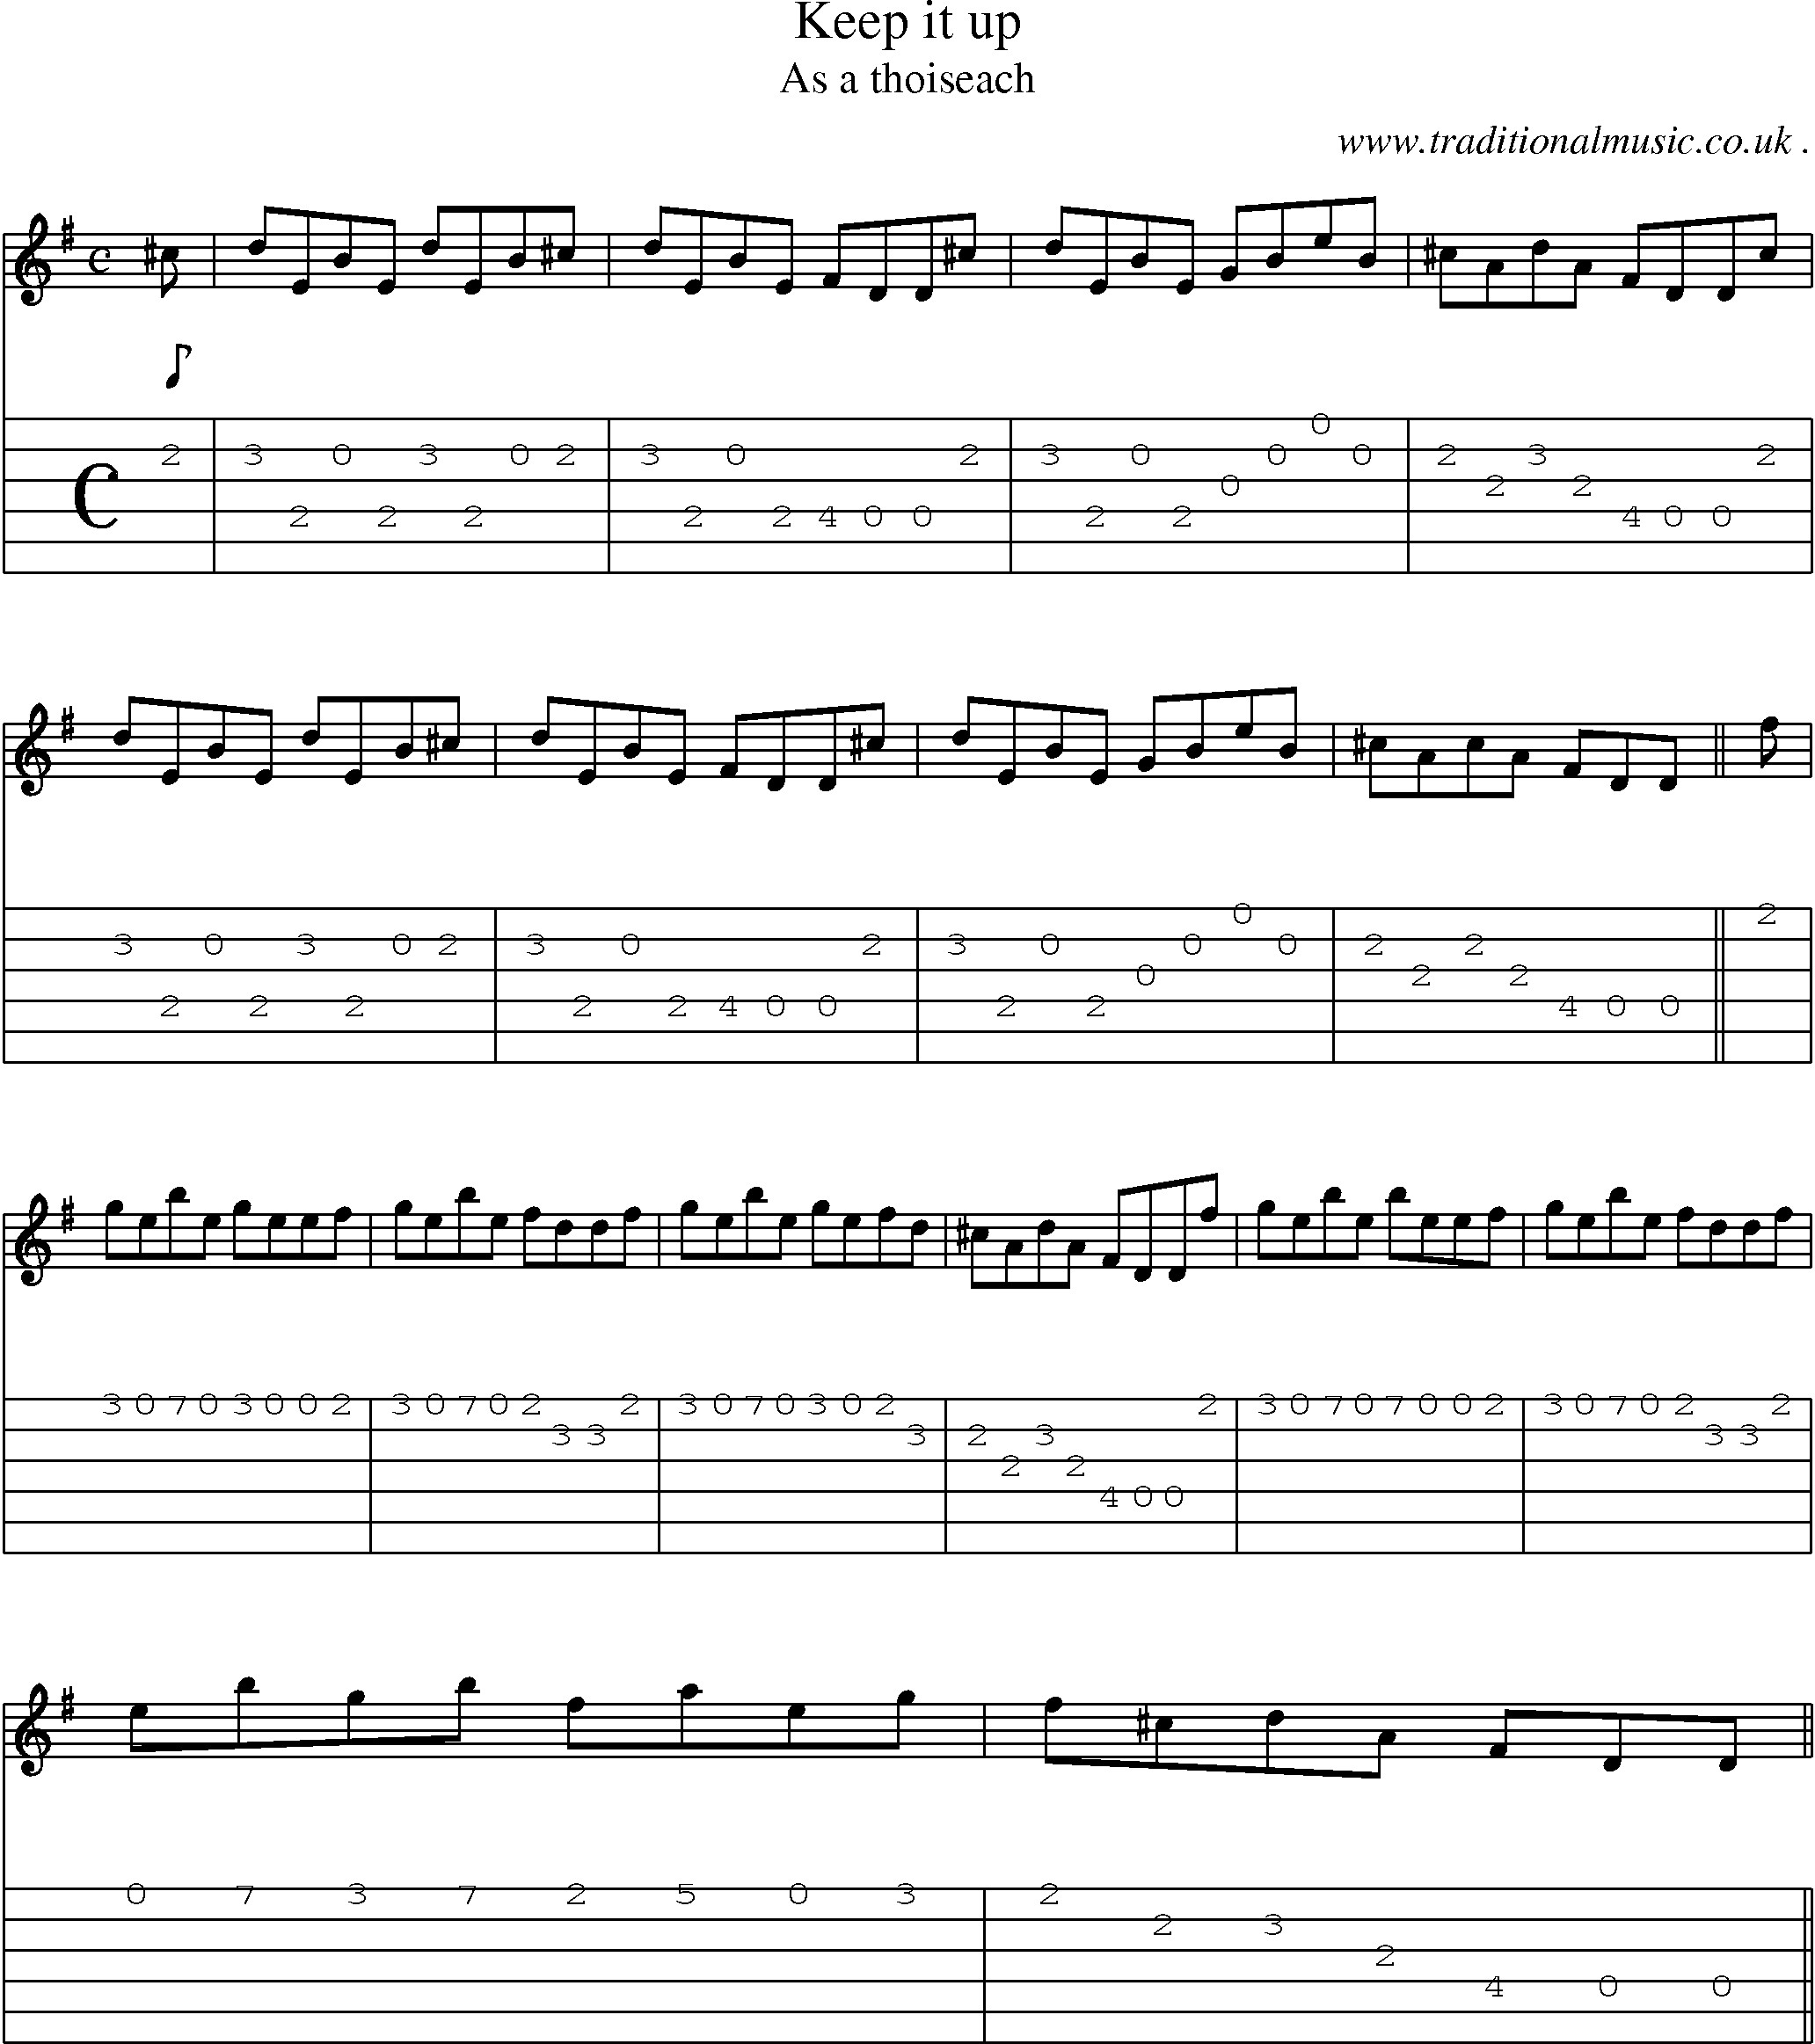 Sheet-music  score, Chords and Guitar Tabs for Keep It Up